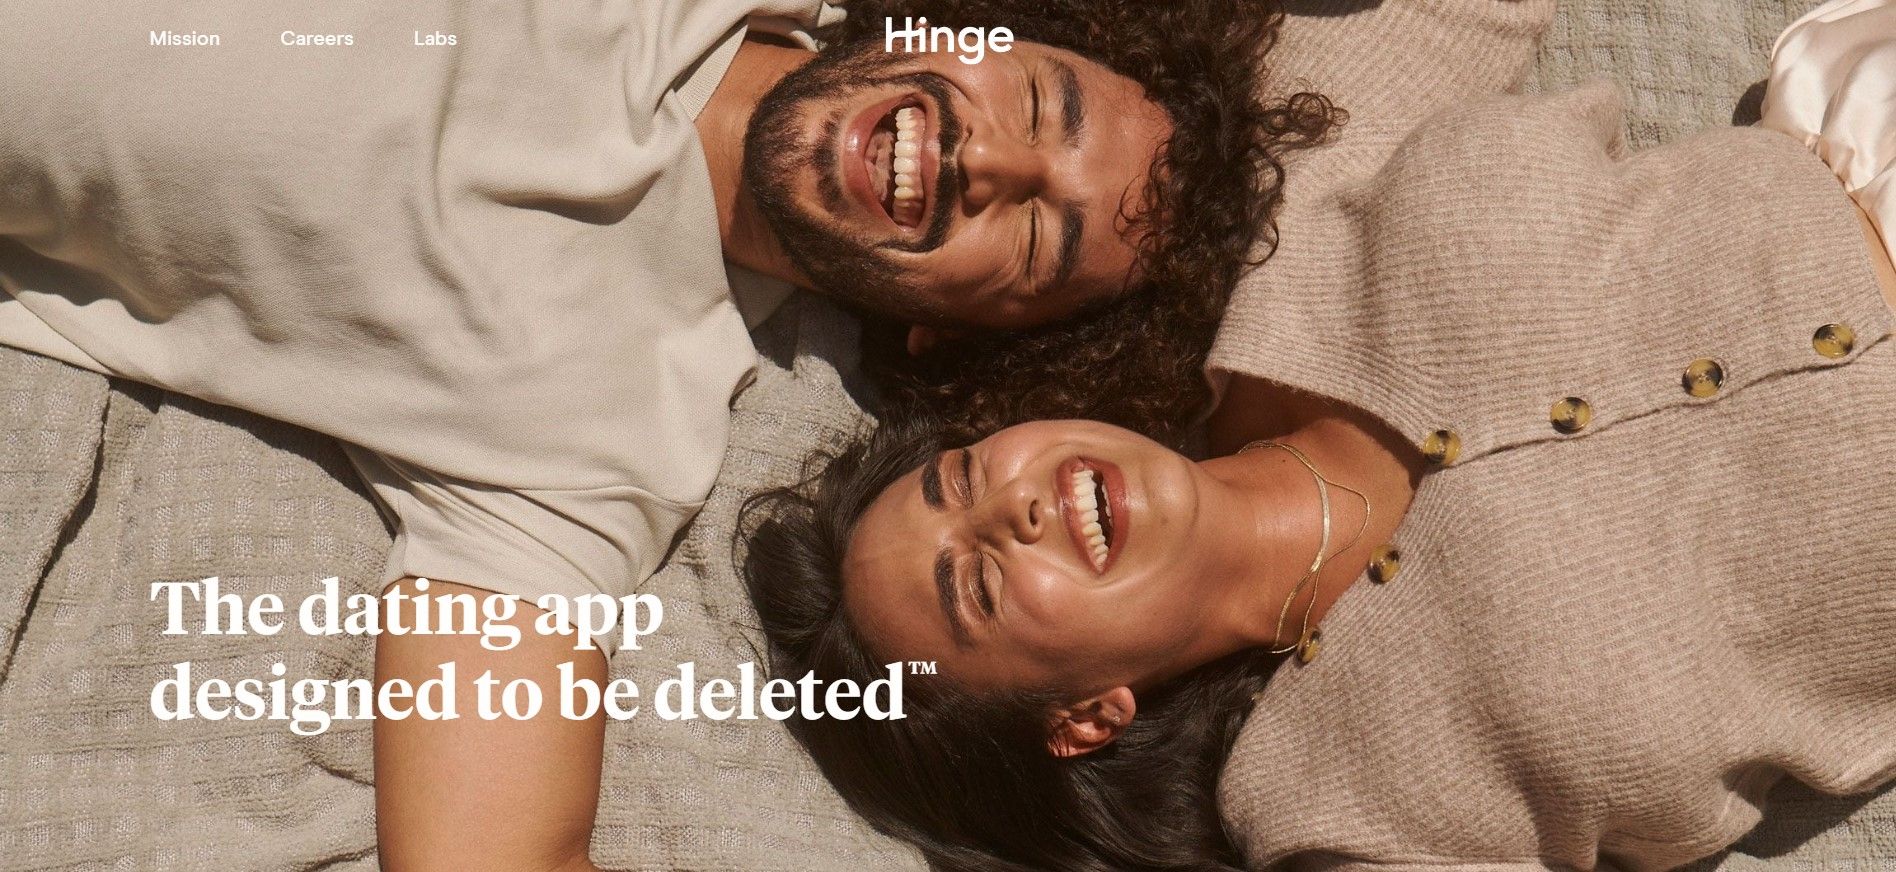 How to stop feeling lonely with Hinge